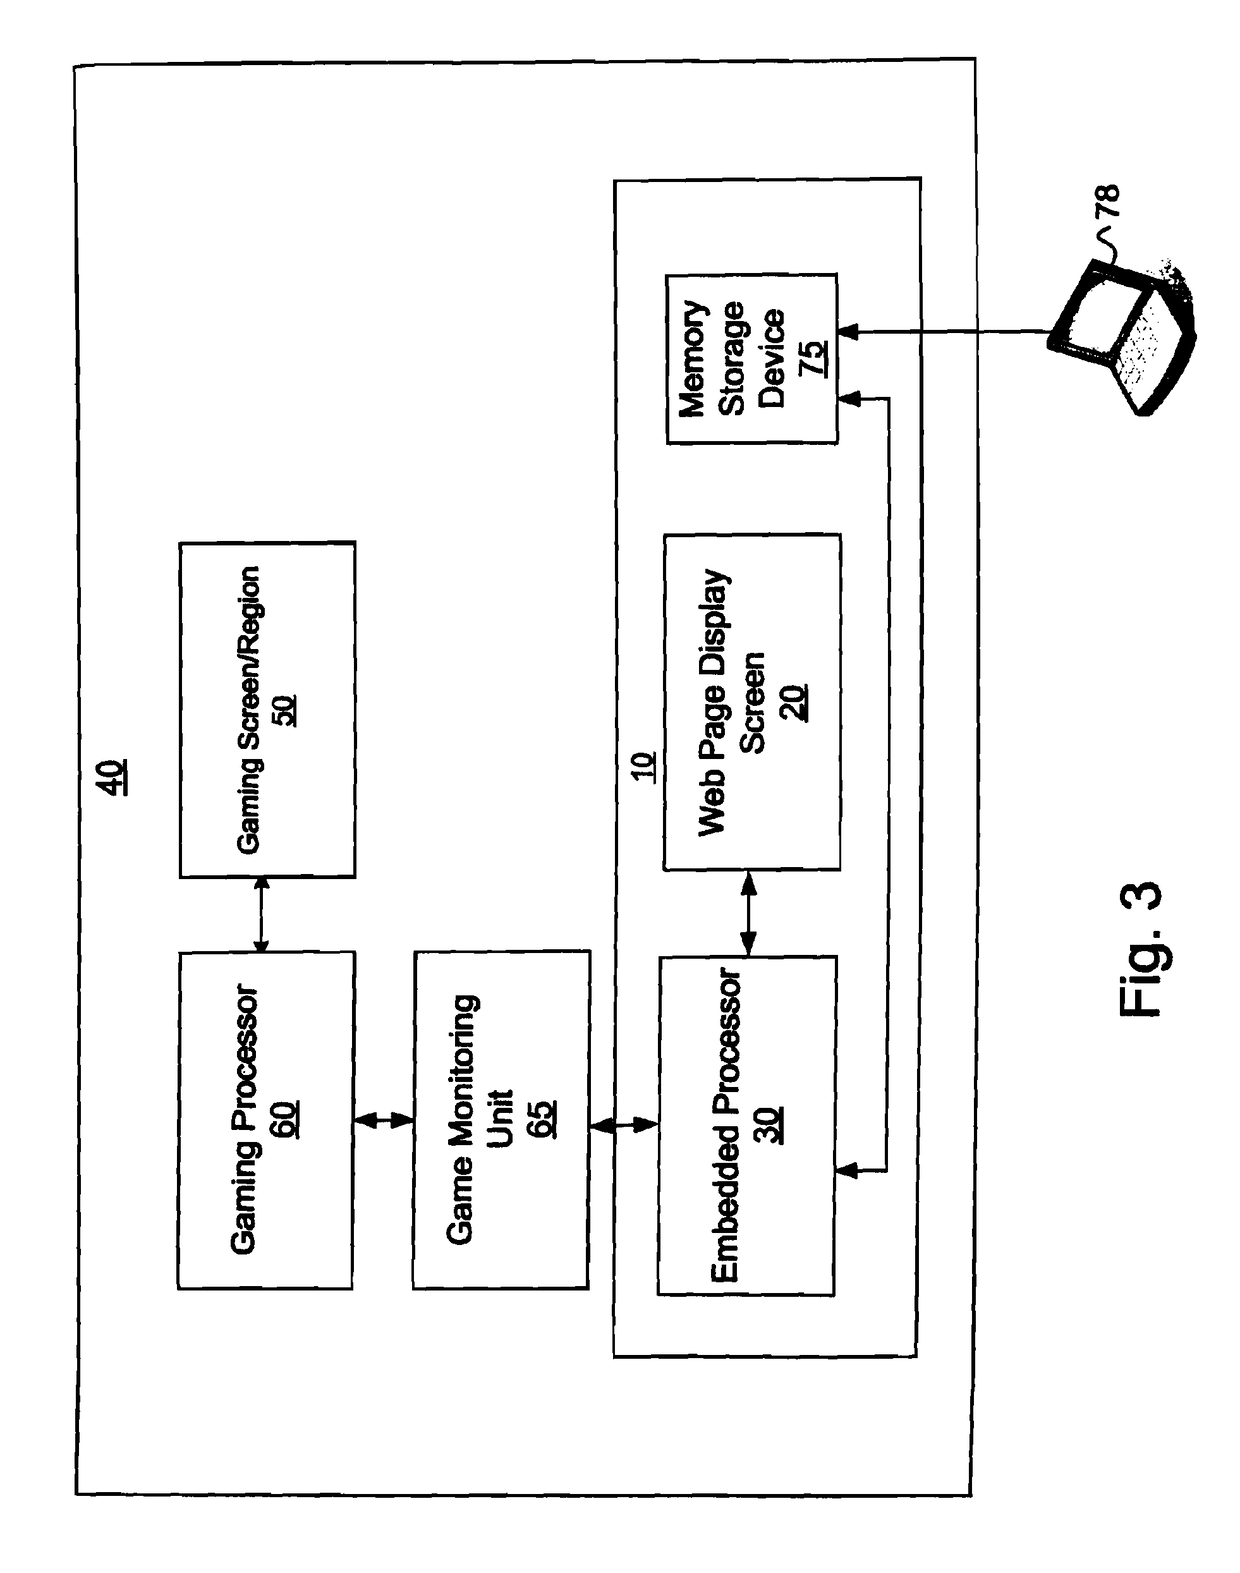 User interface system and method